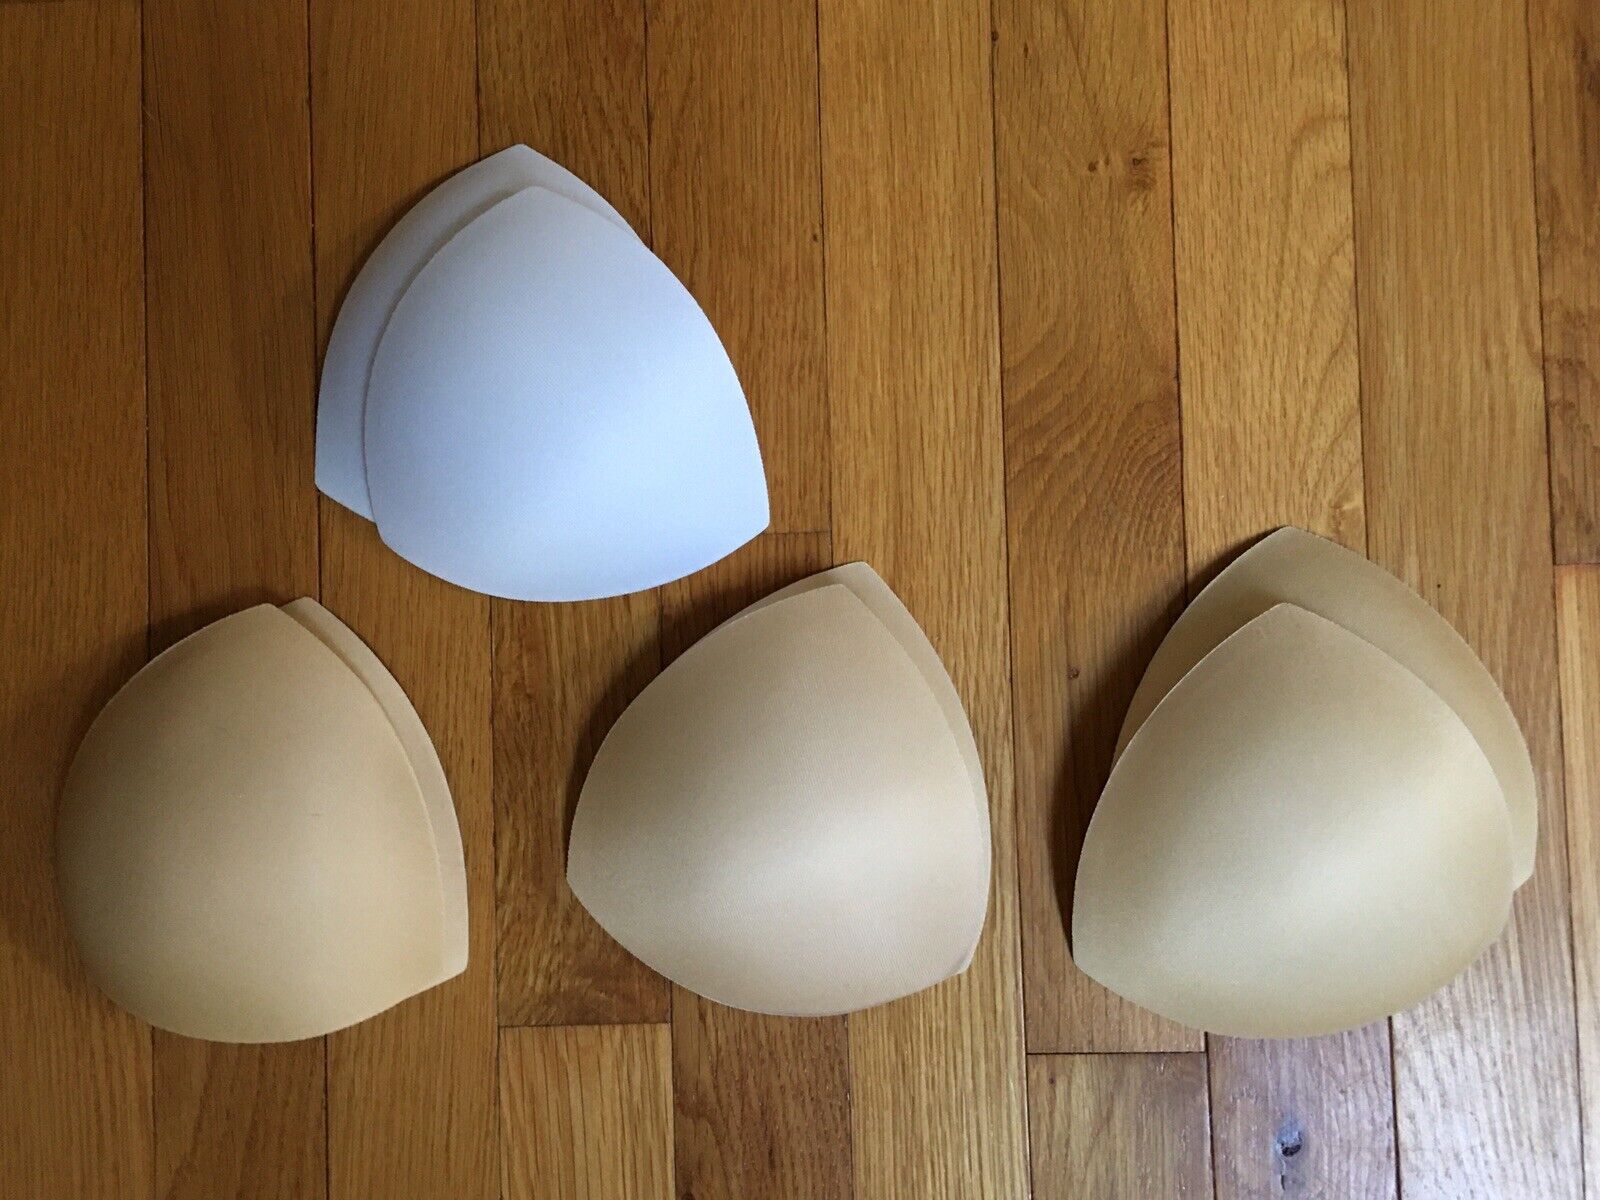 New Lot Of 4 Pairs~8 Women's Bra Insert Cup Pads~sz Large C/d Cup~3 Nude 1 White